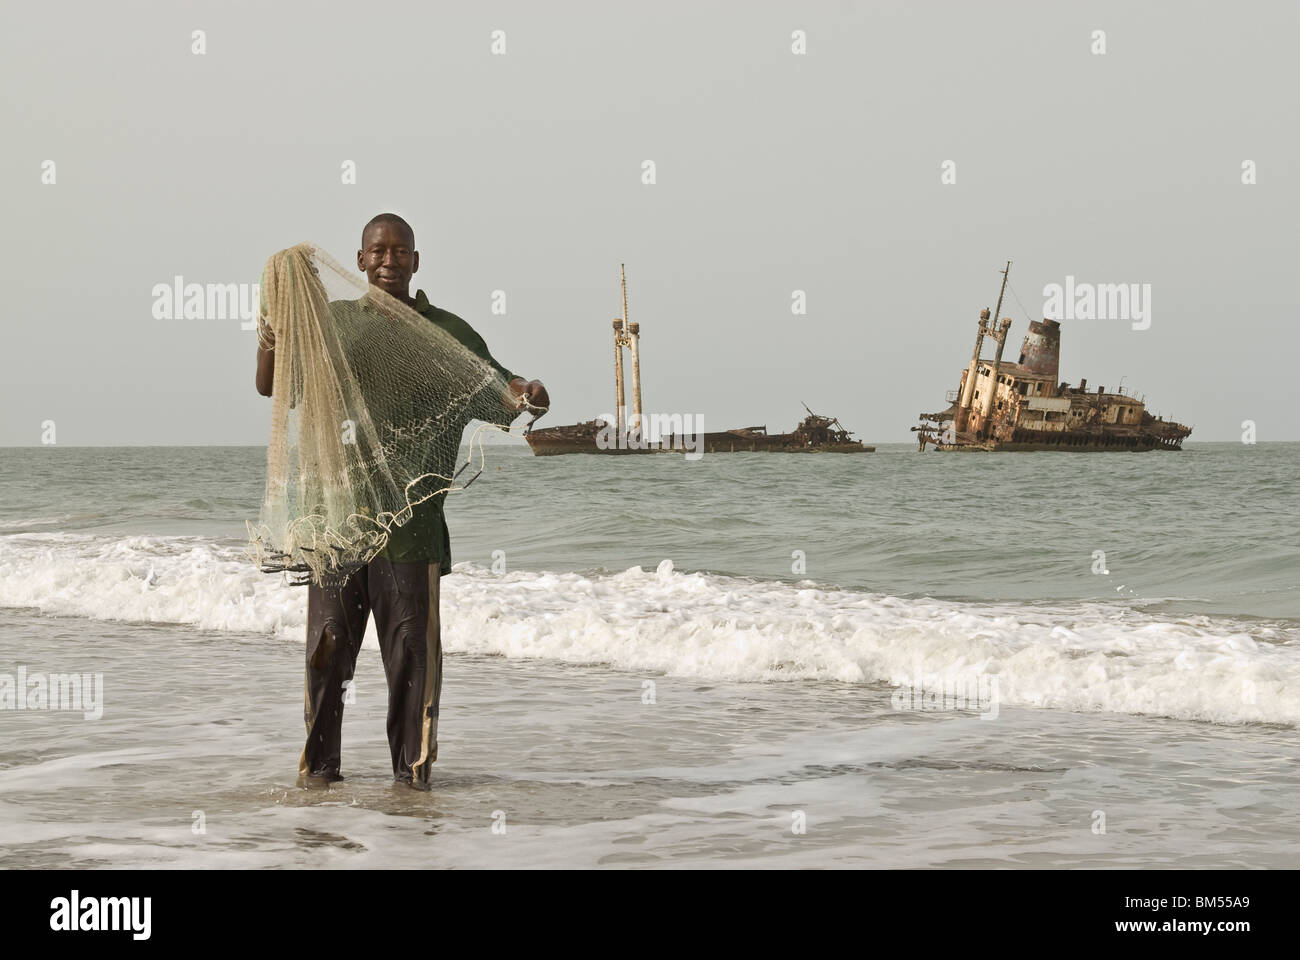 Man fishing with a net from the shore in front of a shipwreck, Palmarin, Senegal, Africa. Stock Photo